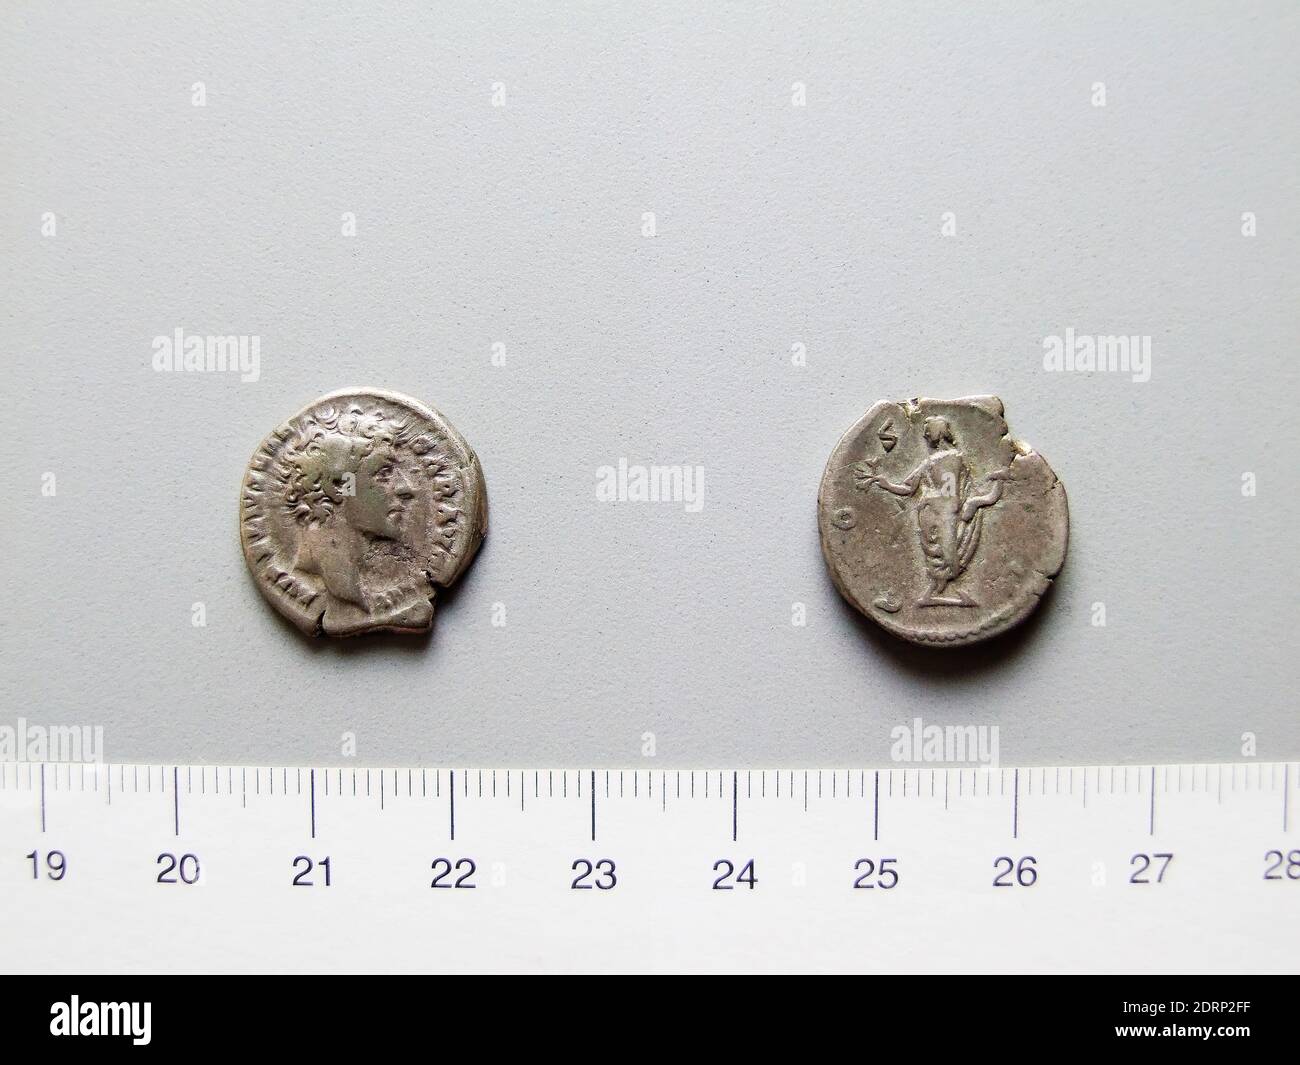 Ruler: Marcus Aurelius, Emperor of Rome, A.D. 121–180, ruled  A.D. 161–80, Ruler: Antoninus Pius, Emperor of Rome, A.D. 86–161, ruled A.D. 138–161, Mint: Rome, Denarius of Marcus Aurelius, Emperor of Rome; Antoninus Pius, Emperor of Rome from Rome, 145–47, Silver, 3.36 g, 6:00, 18.30 mm, Made in Rome, Italy, Roman, 2nd century, Numismatics Stock Photo